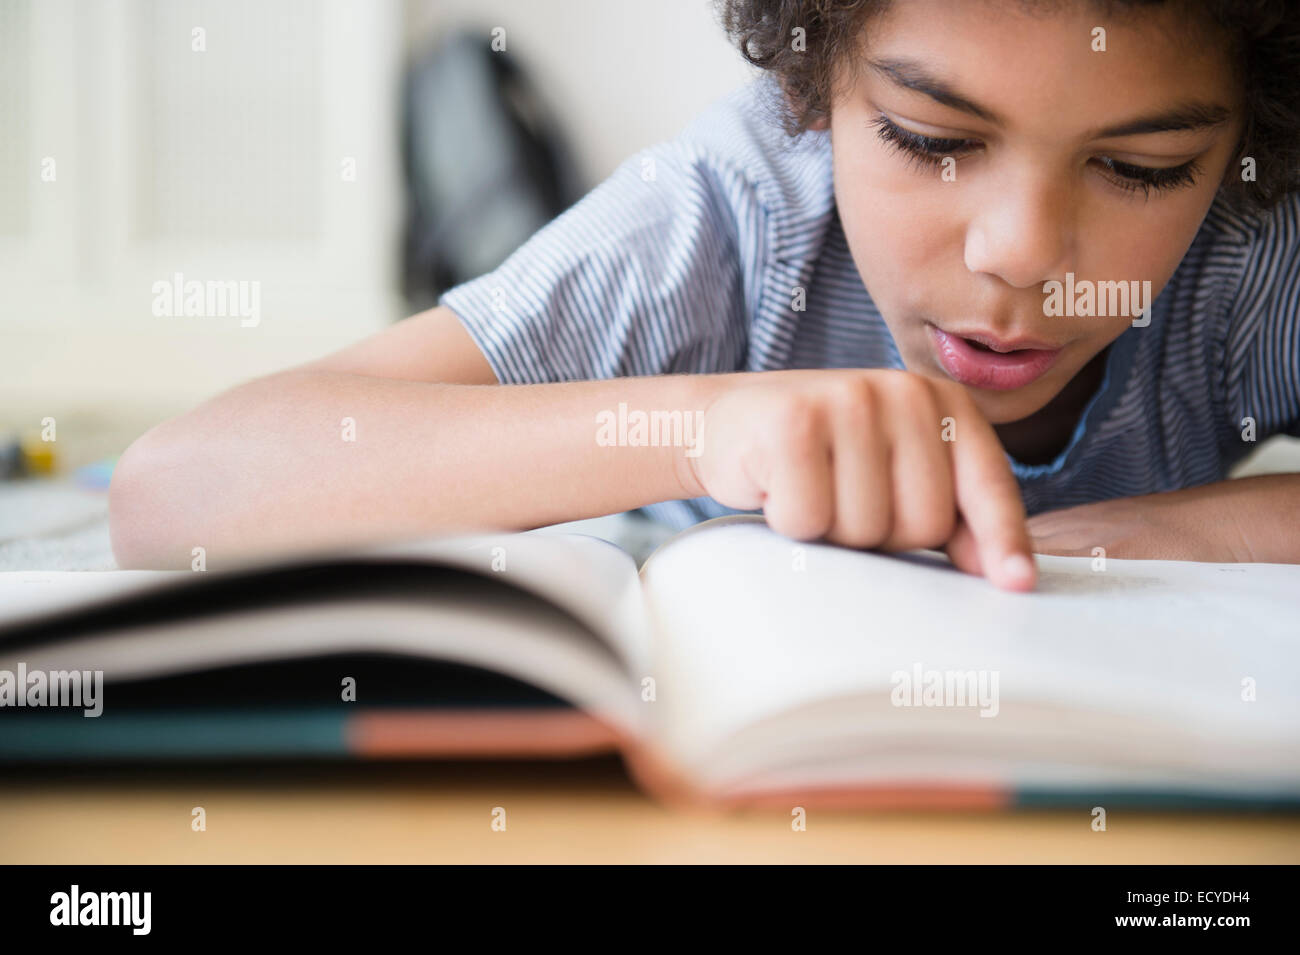 Mixed Race boy reading book at desk Banque D'Images